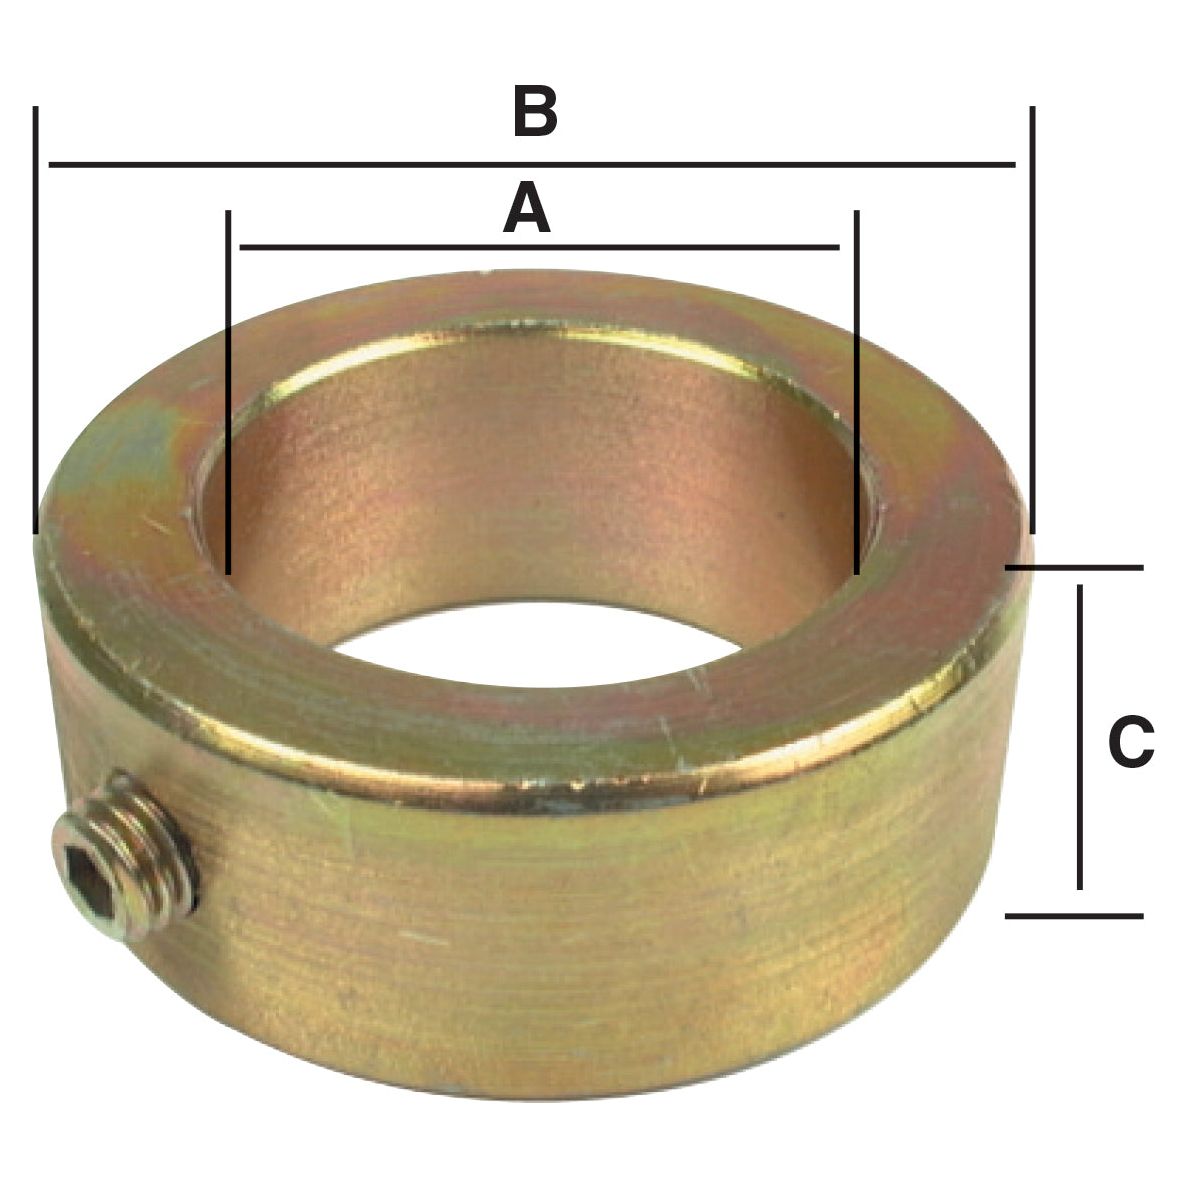 Imperial Shaft Locking Collar, ID: 7/8", OD: 1 1/2", Height: 9/16". - S.98 - Farming Parts